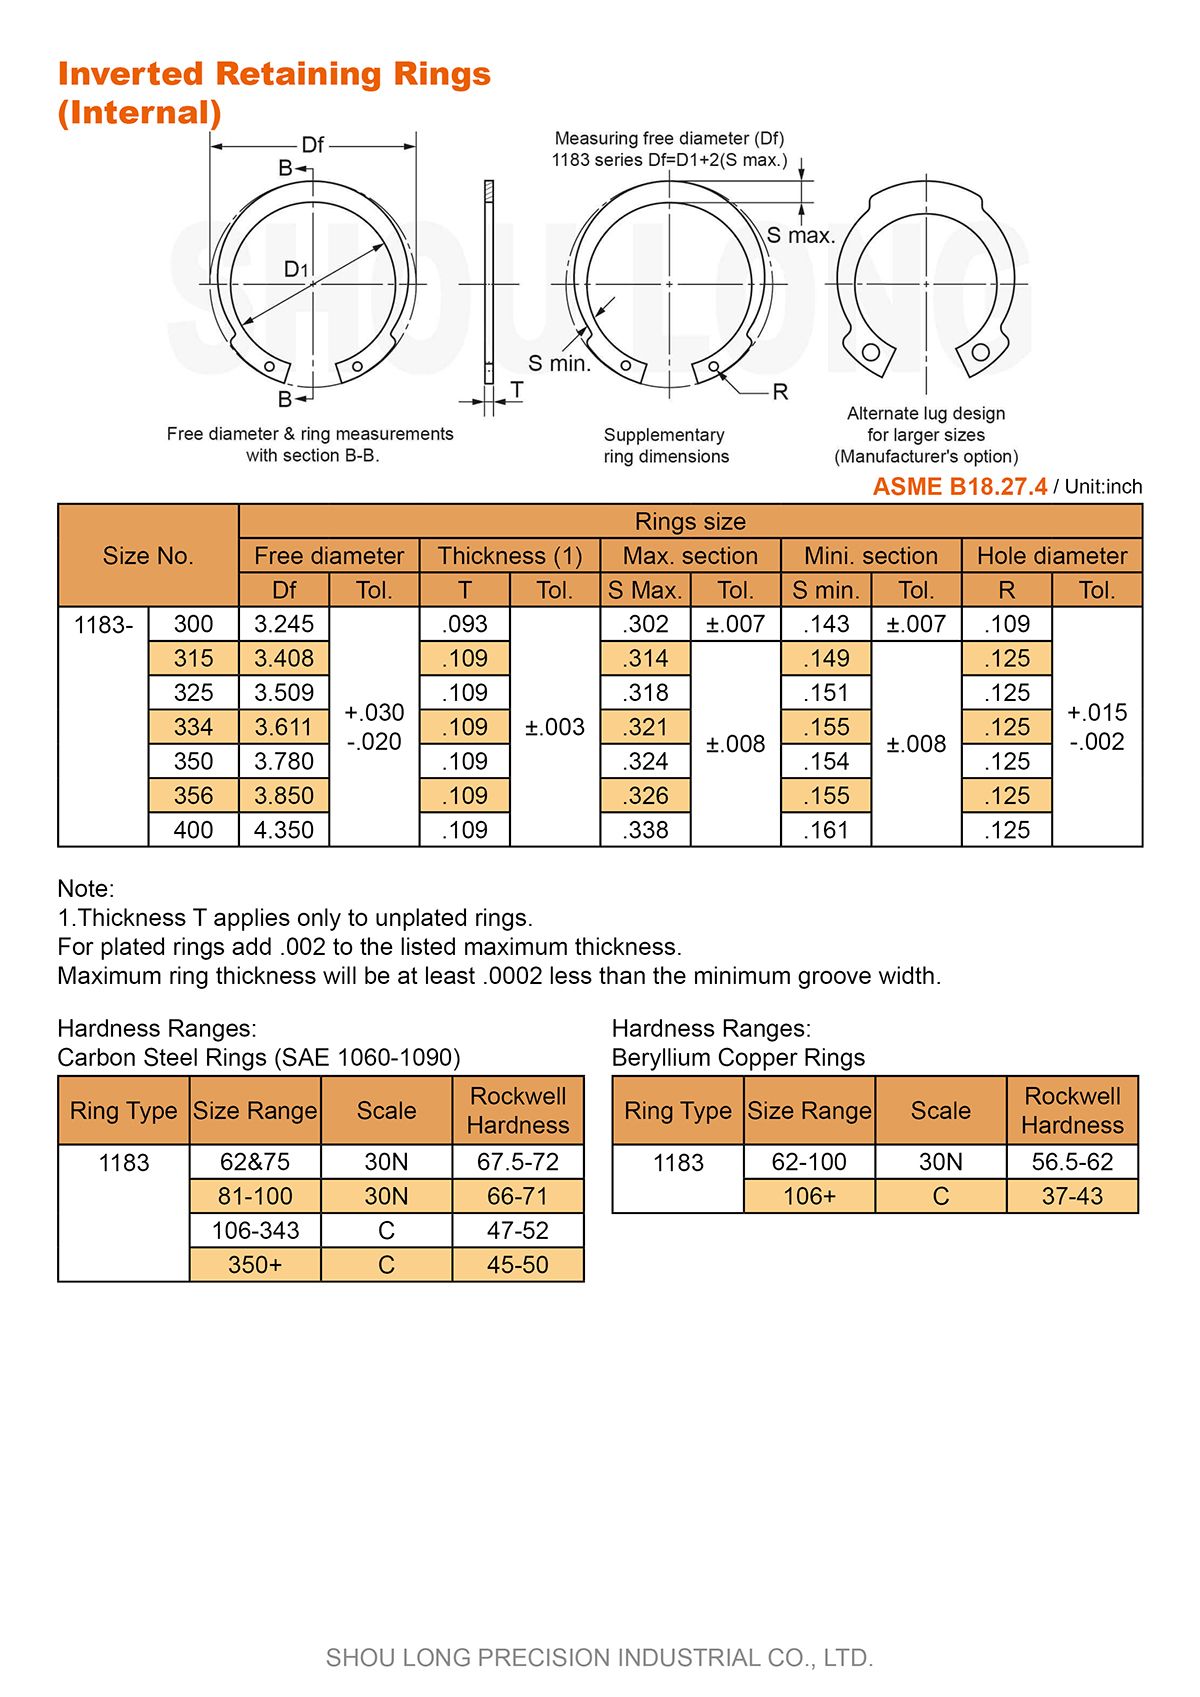 Spec of Inch Inverted Retaining Rings for Bores ASME/ANSI B18.27.4 - 2